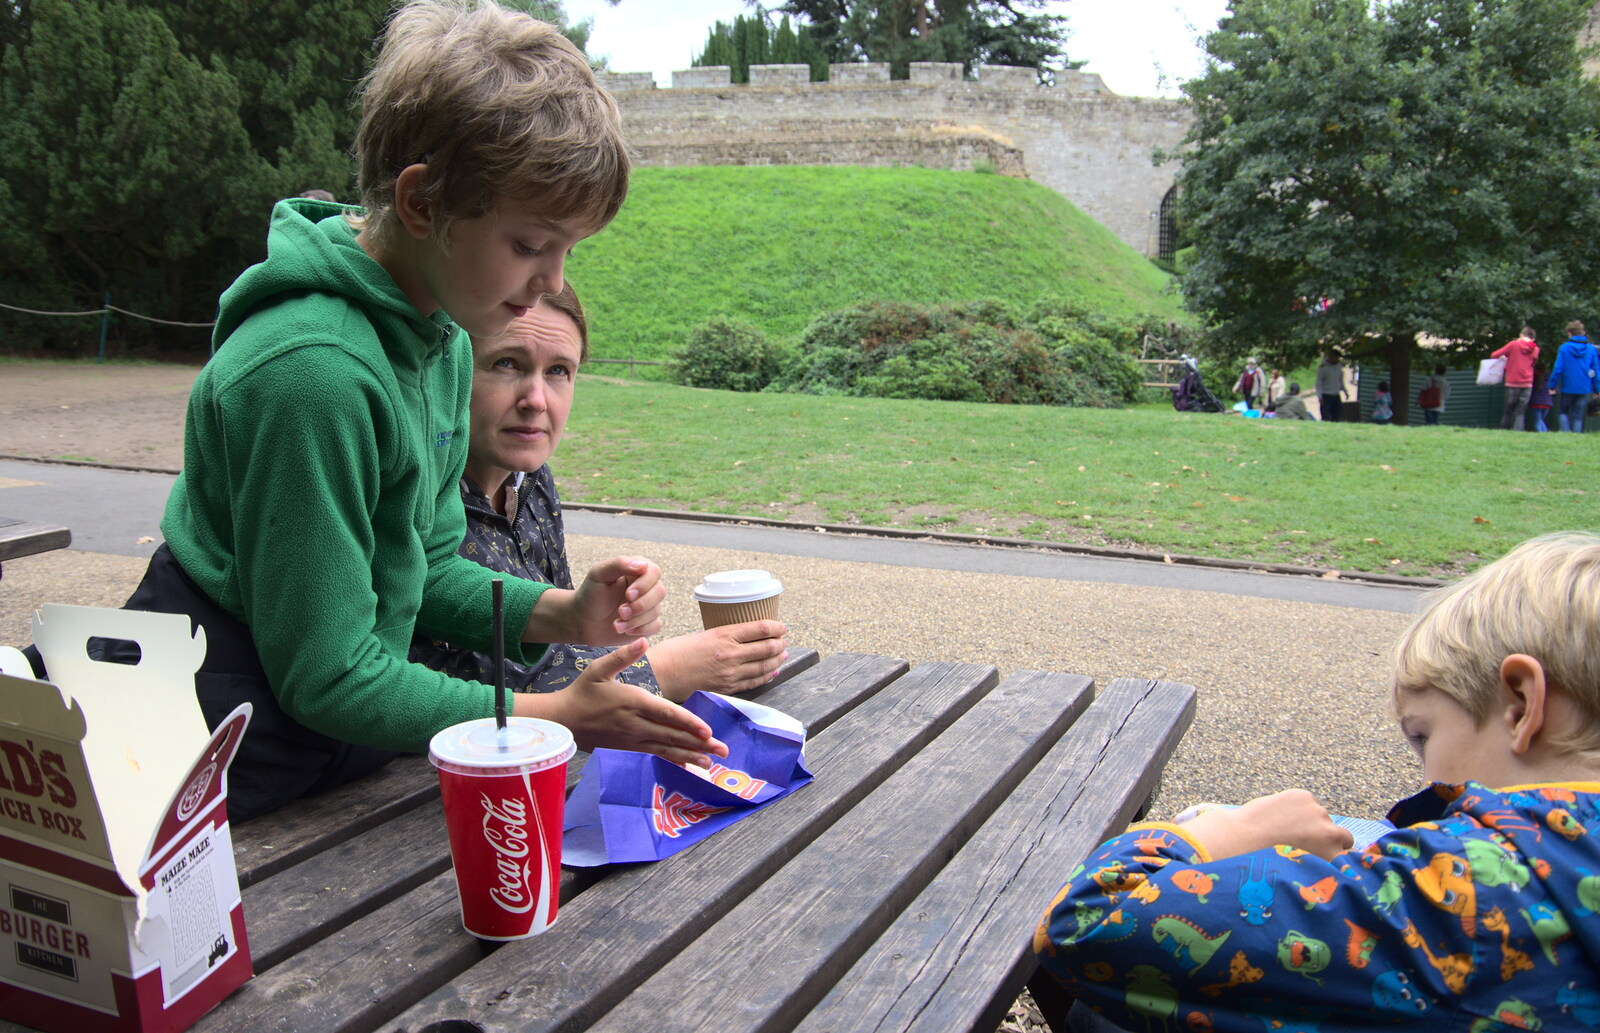 We stop for lunch from A Day at Warwick Castle, Warwickshire - 8th September 2018